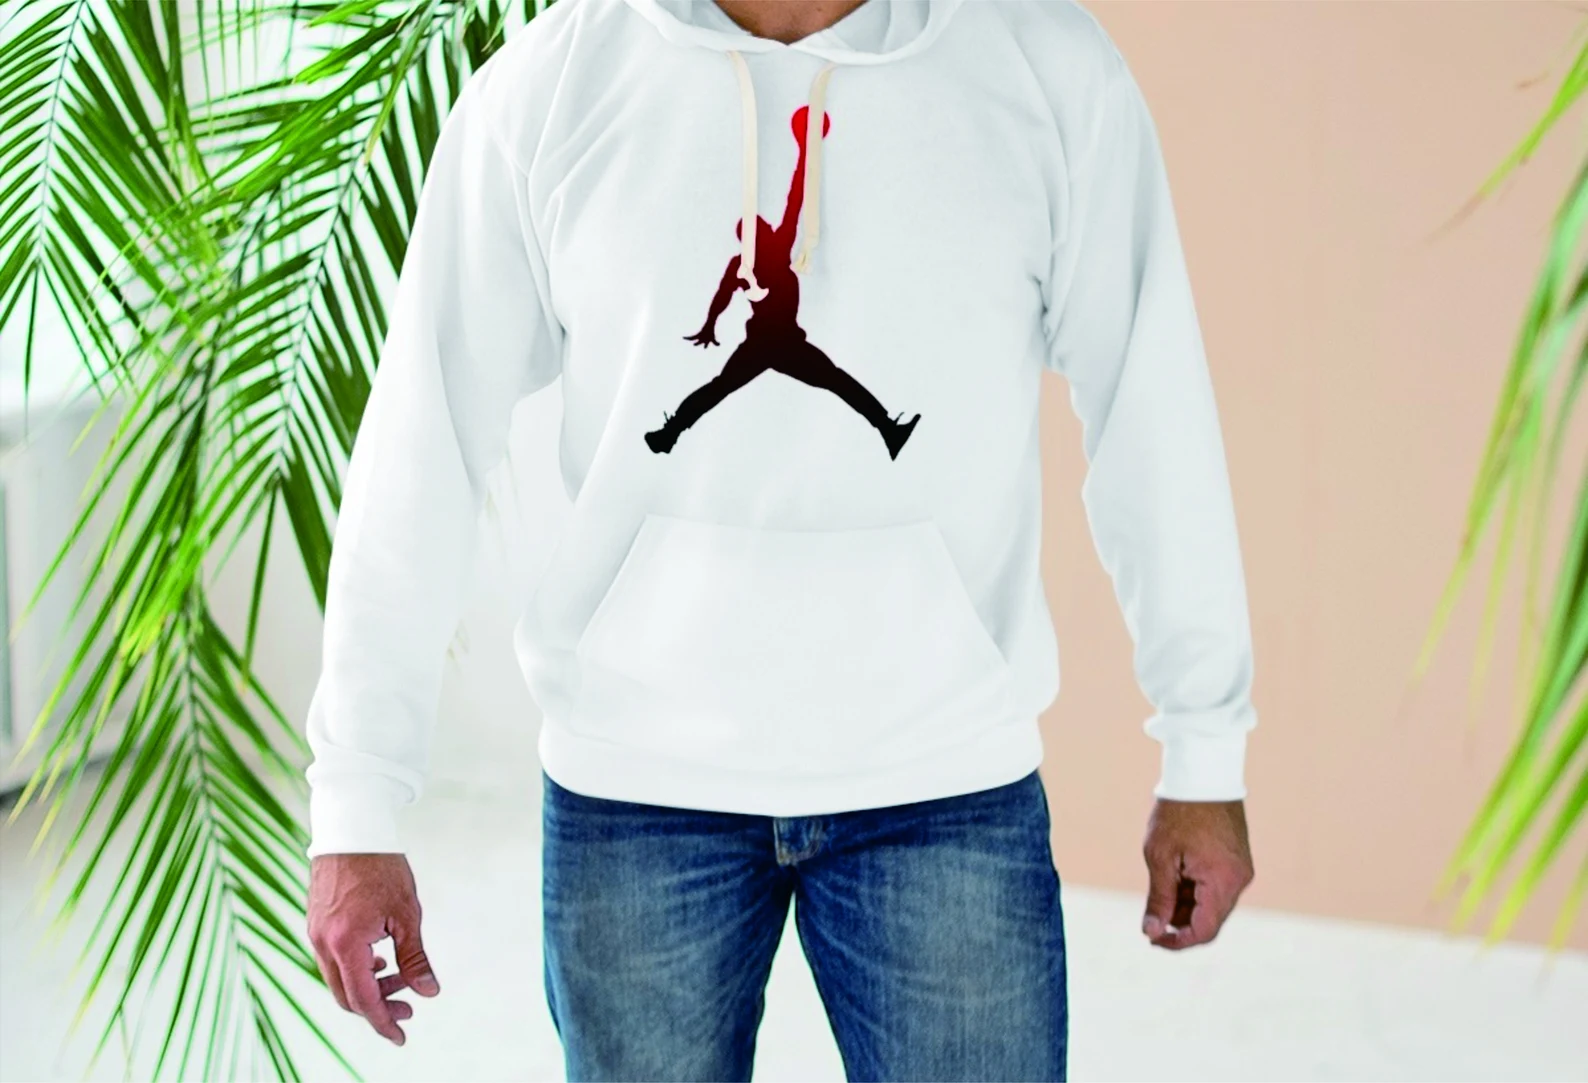 Black and red Jordan on a white sweater.